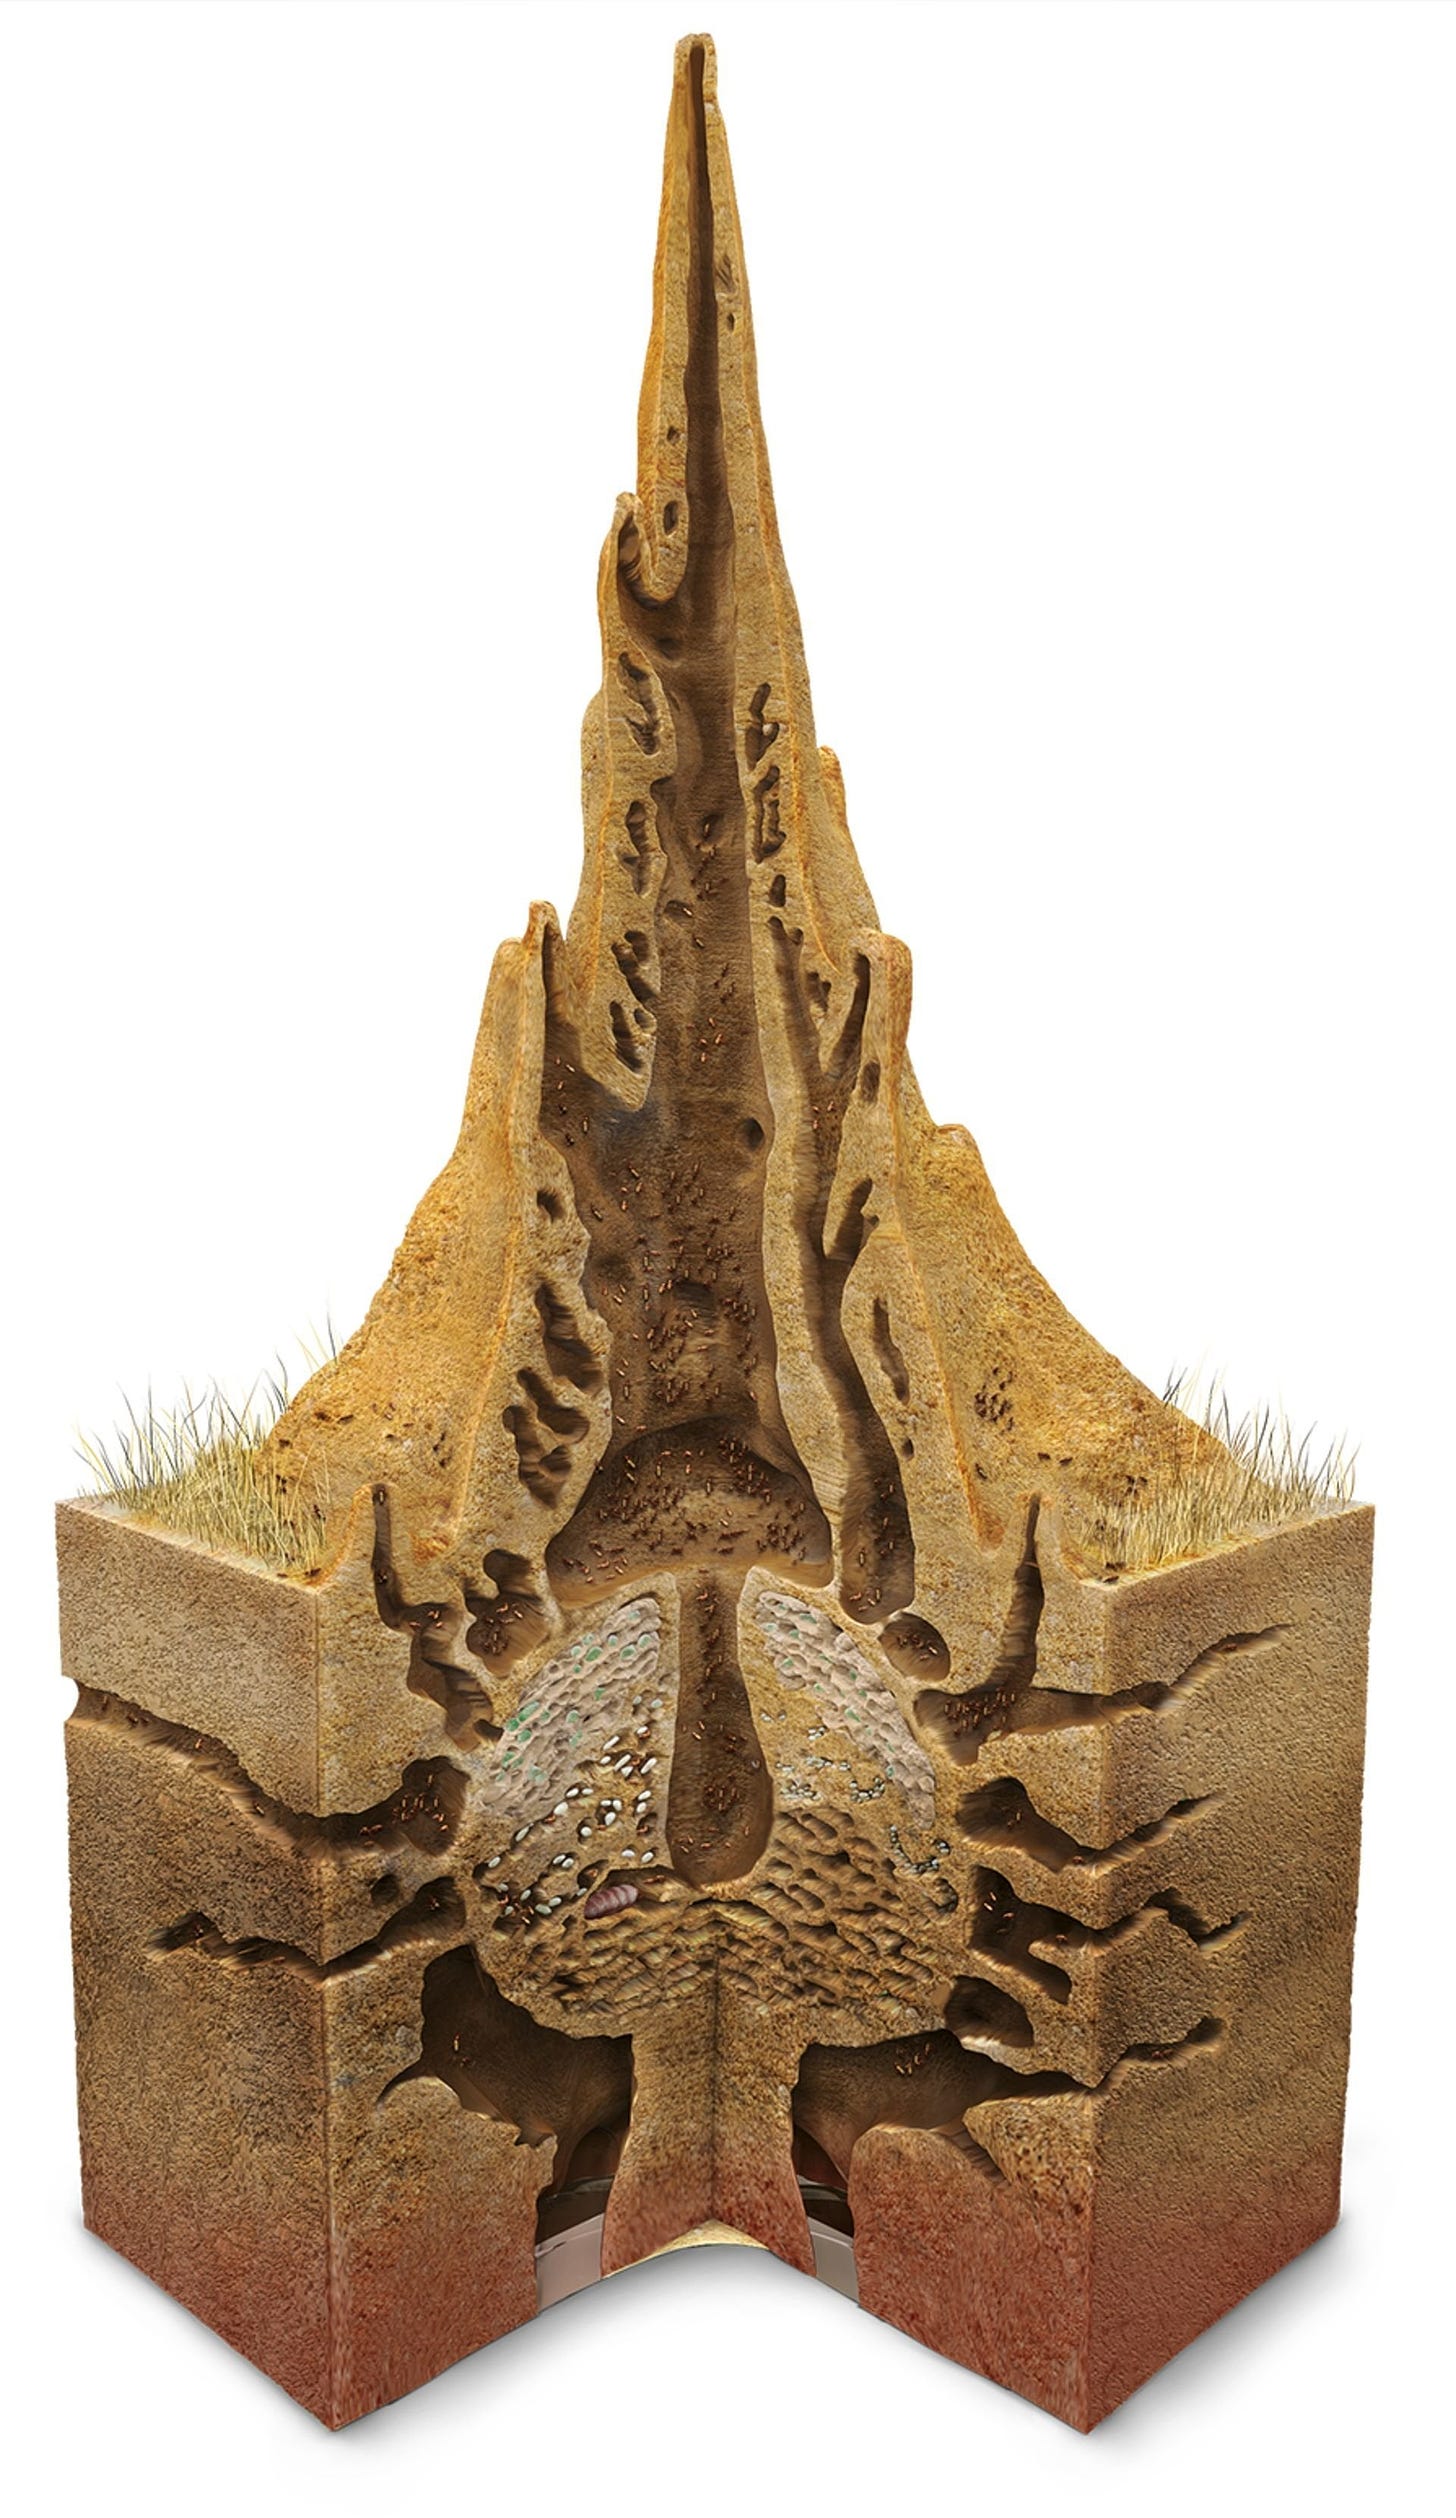 termite mound cross-section image